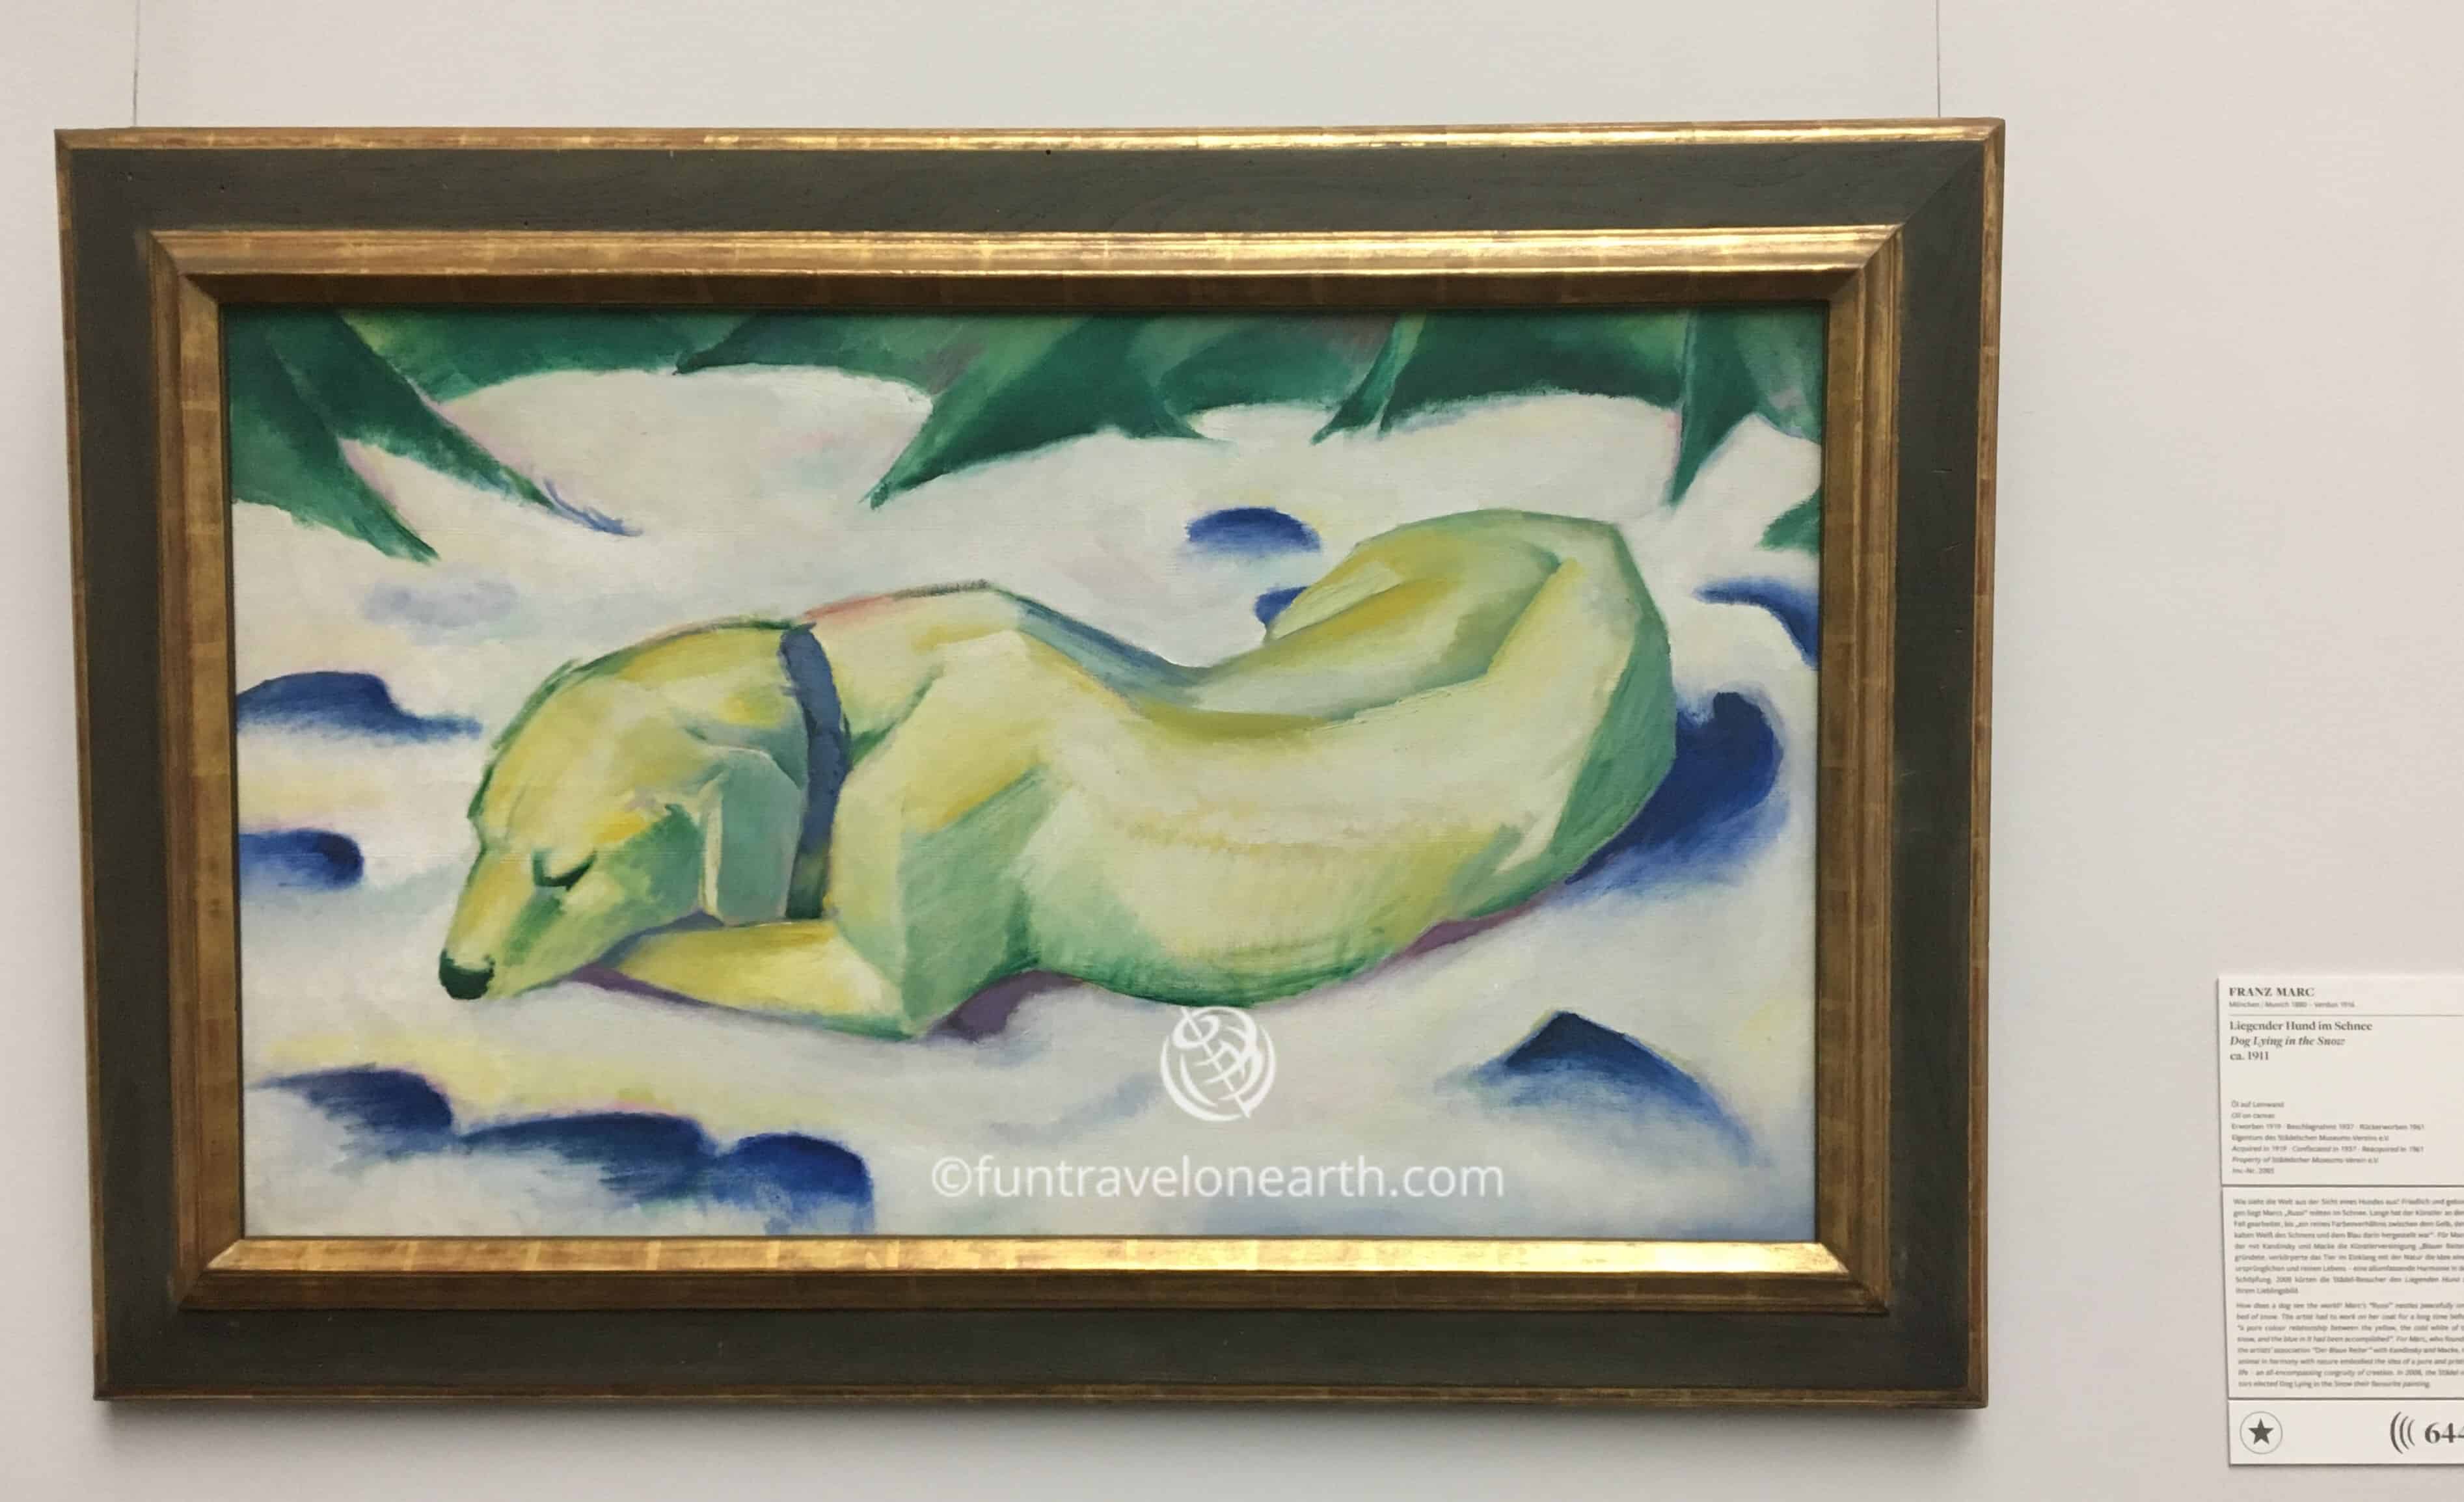 FRANZ MARC 「Dog Lying in the Snow」, Städel Museum